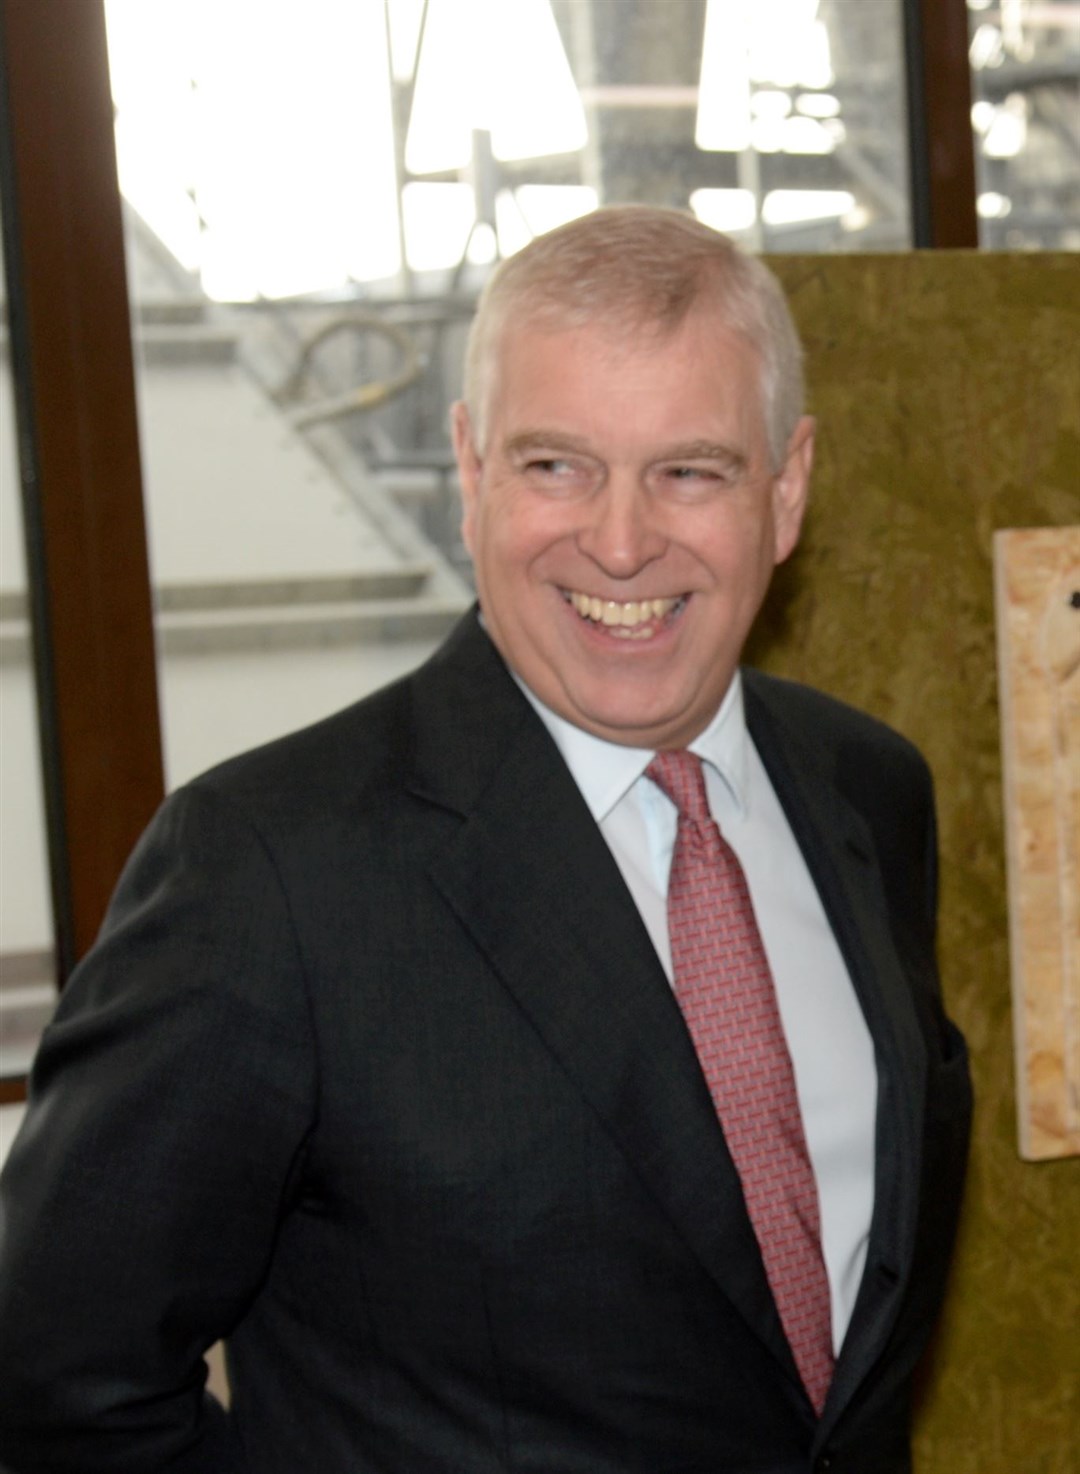 Prince Andrew also holds the title of Earl of Inverness.